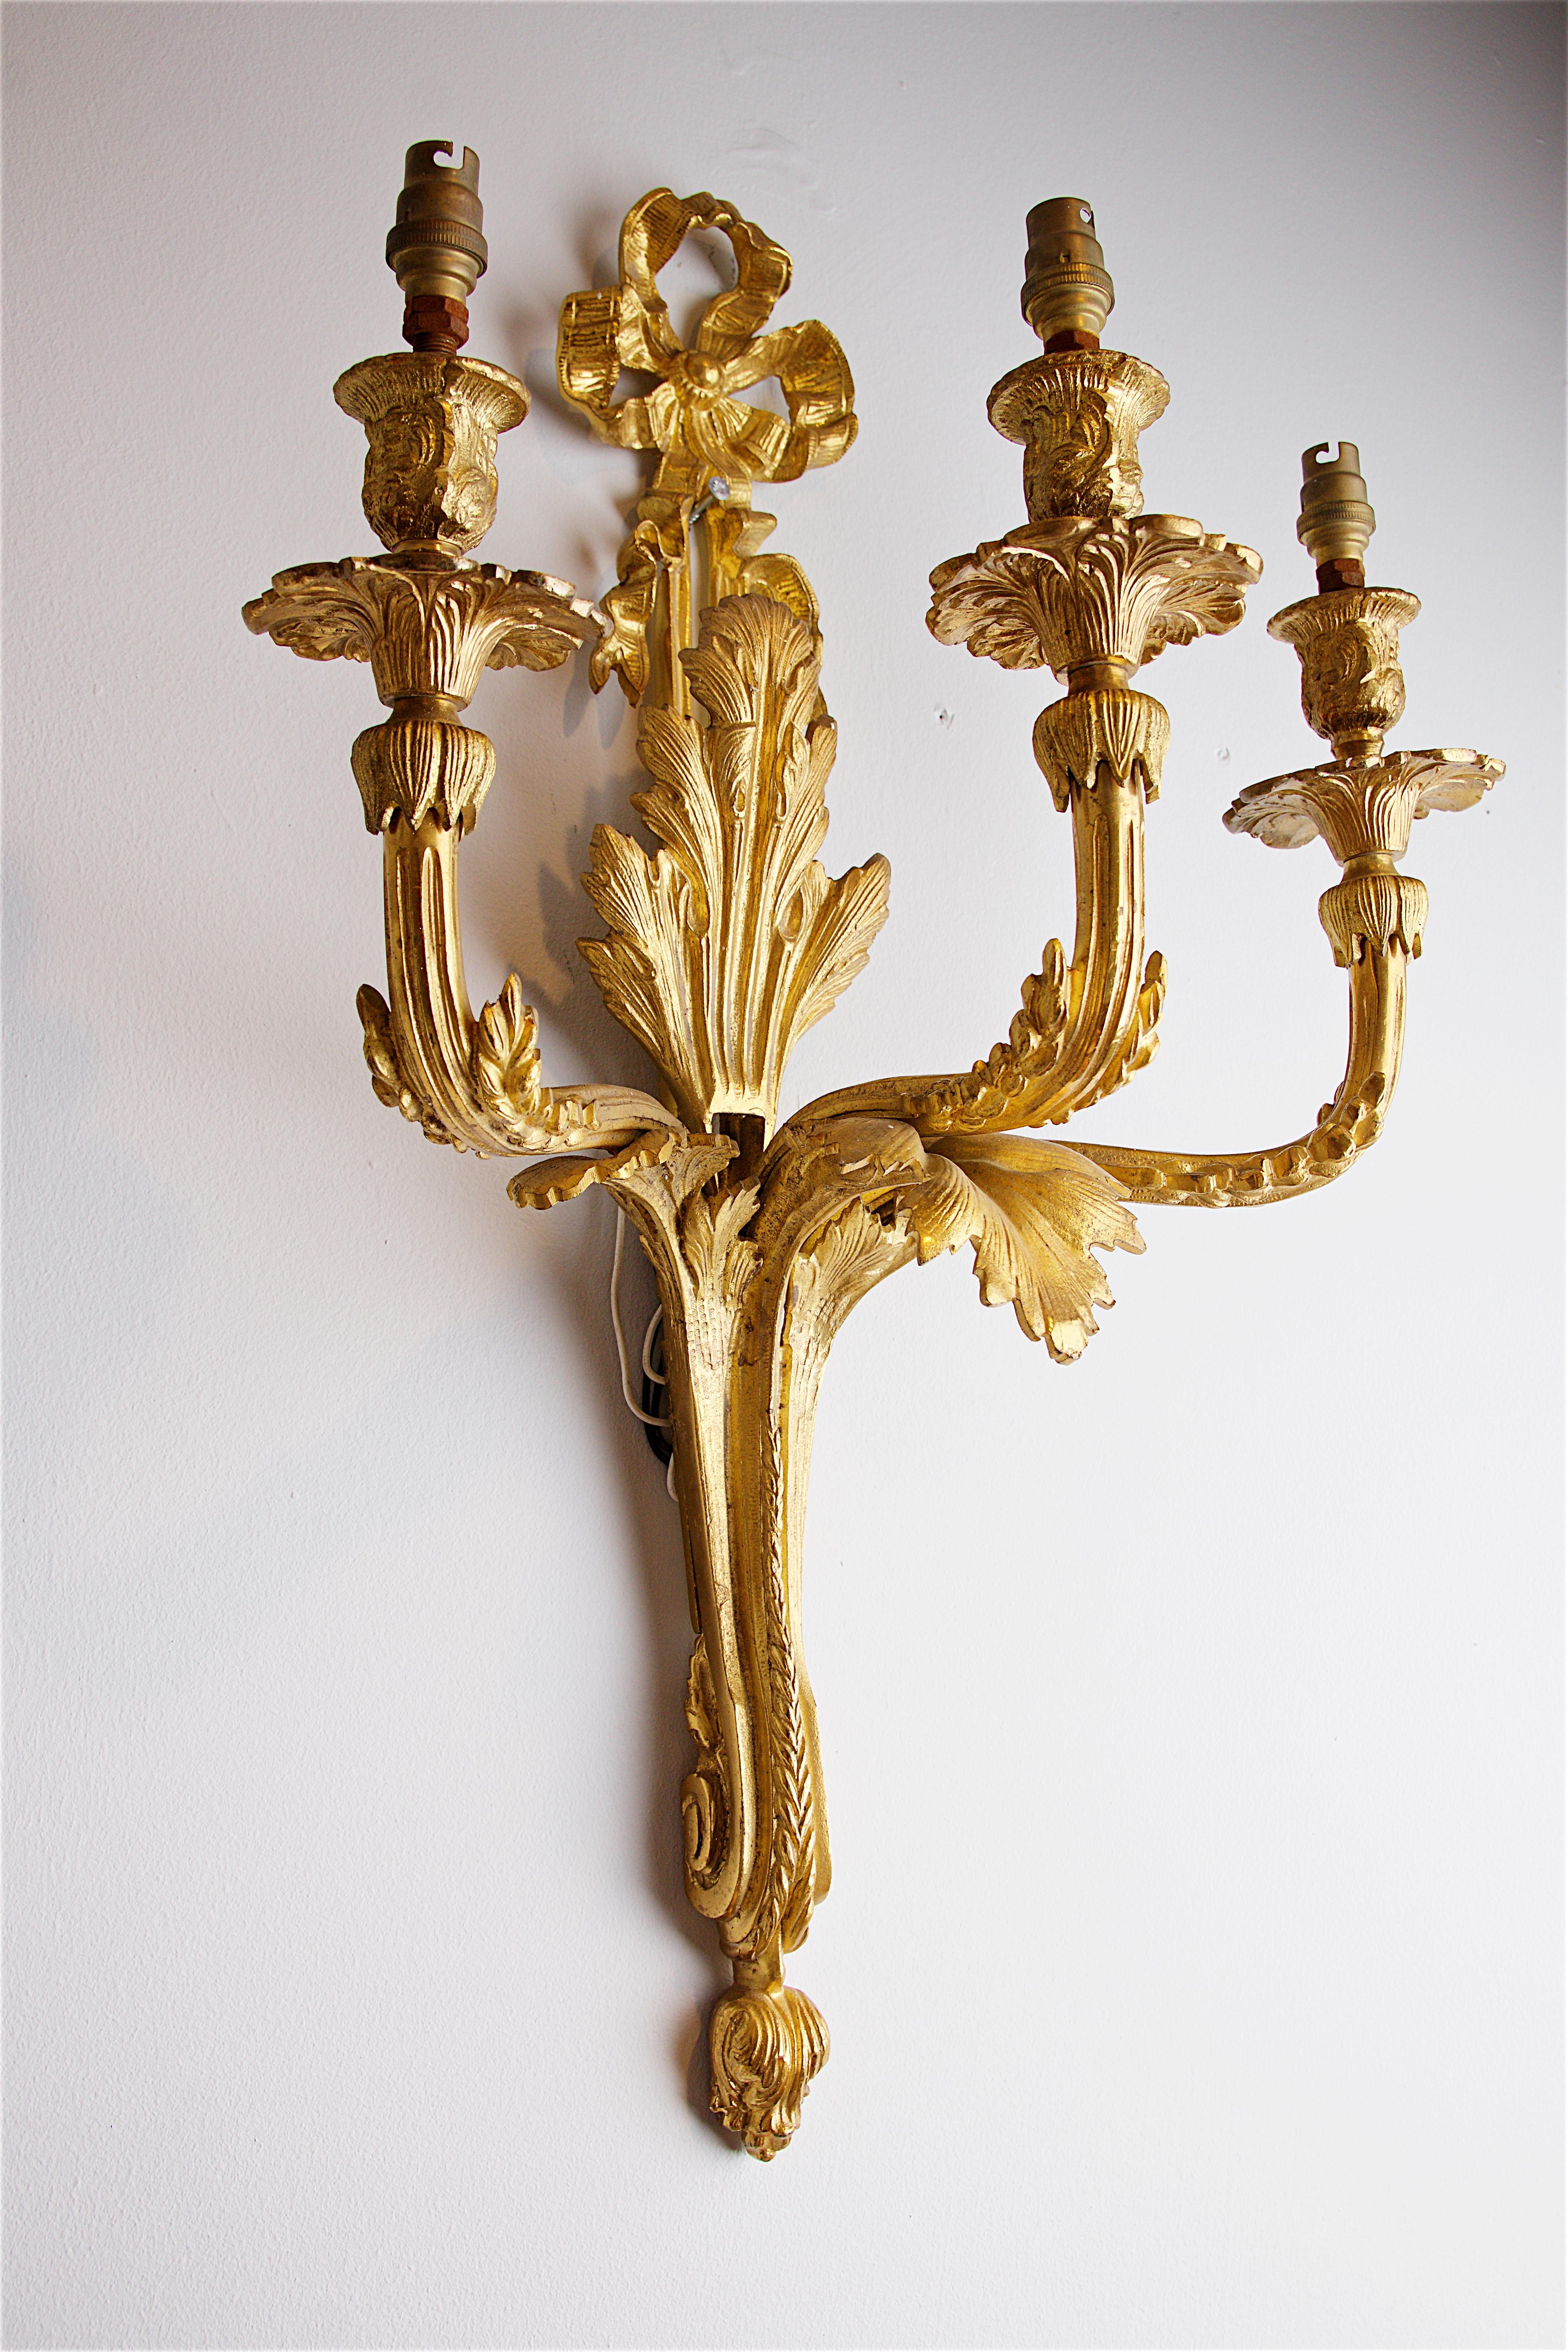 Pair of Mid-20th Century English Ormolu Wall-Mounted Candelabra For Sale 3